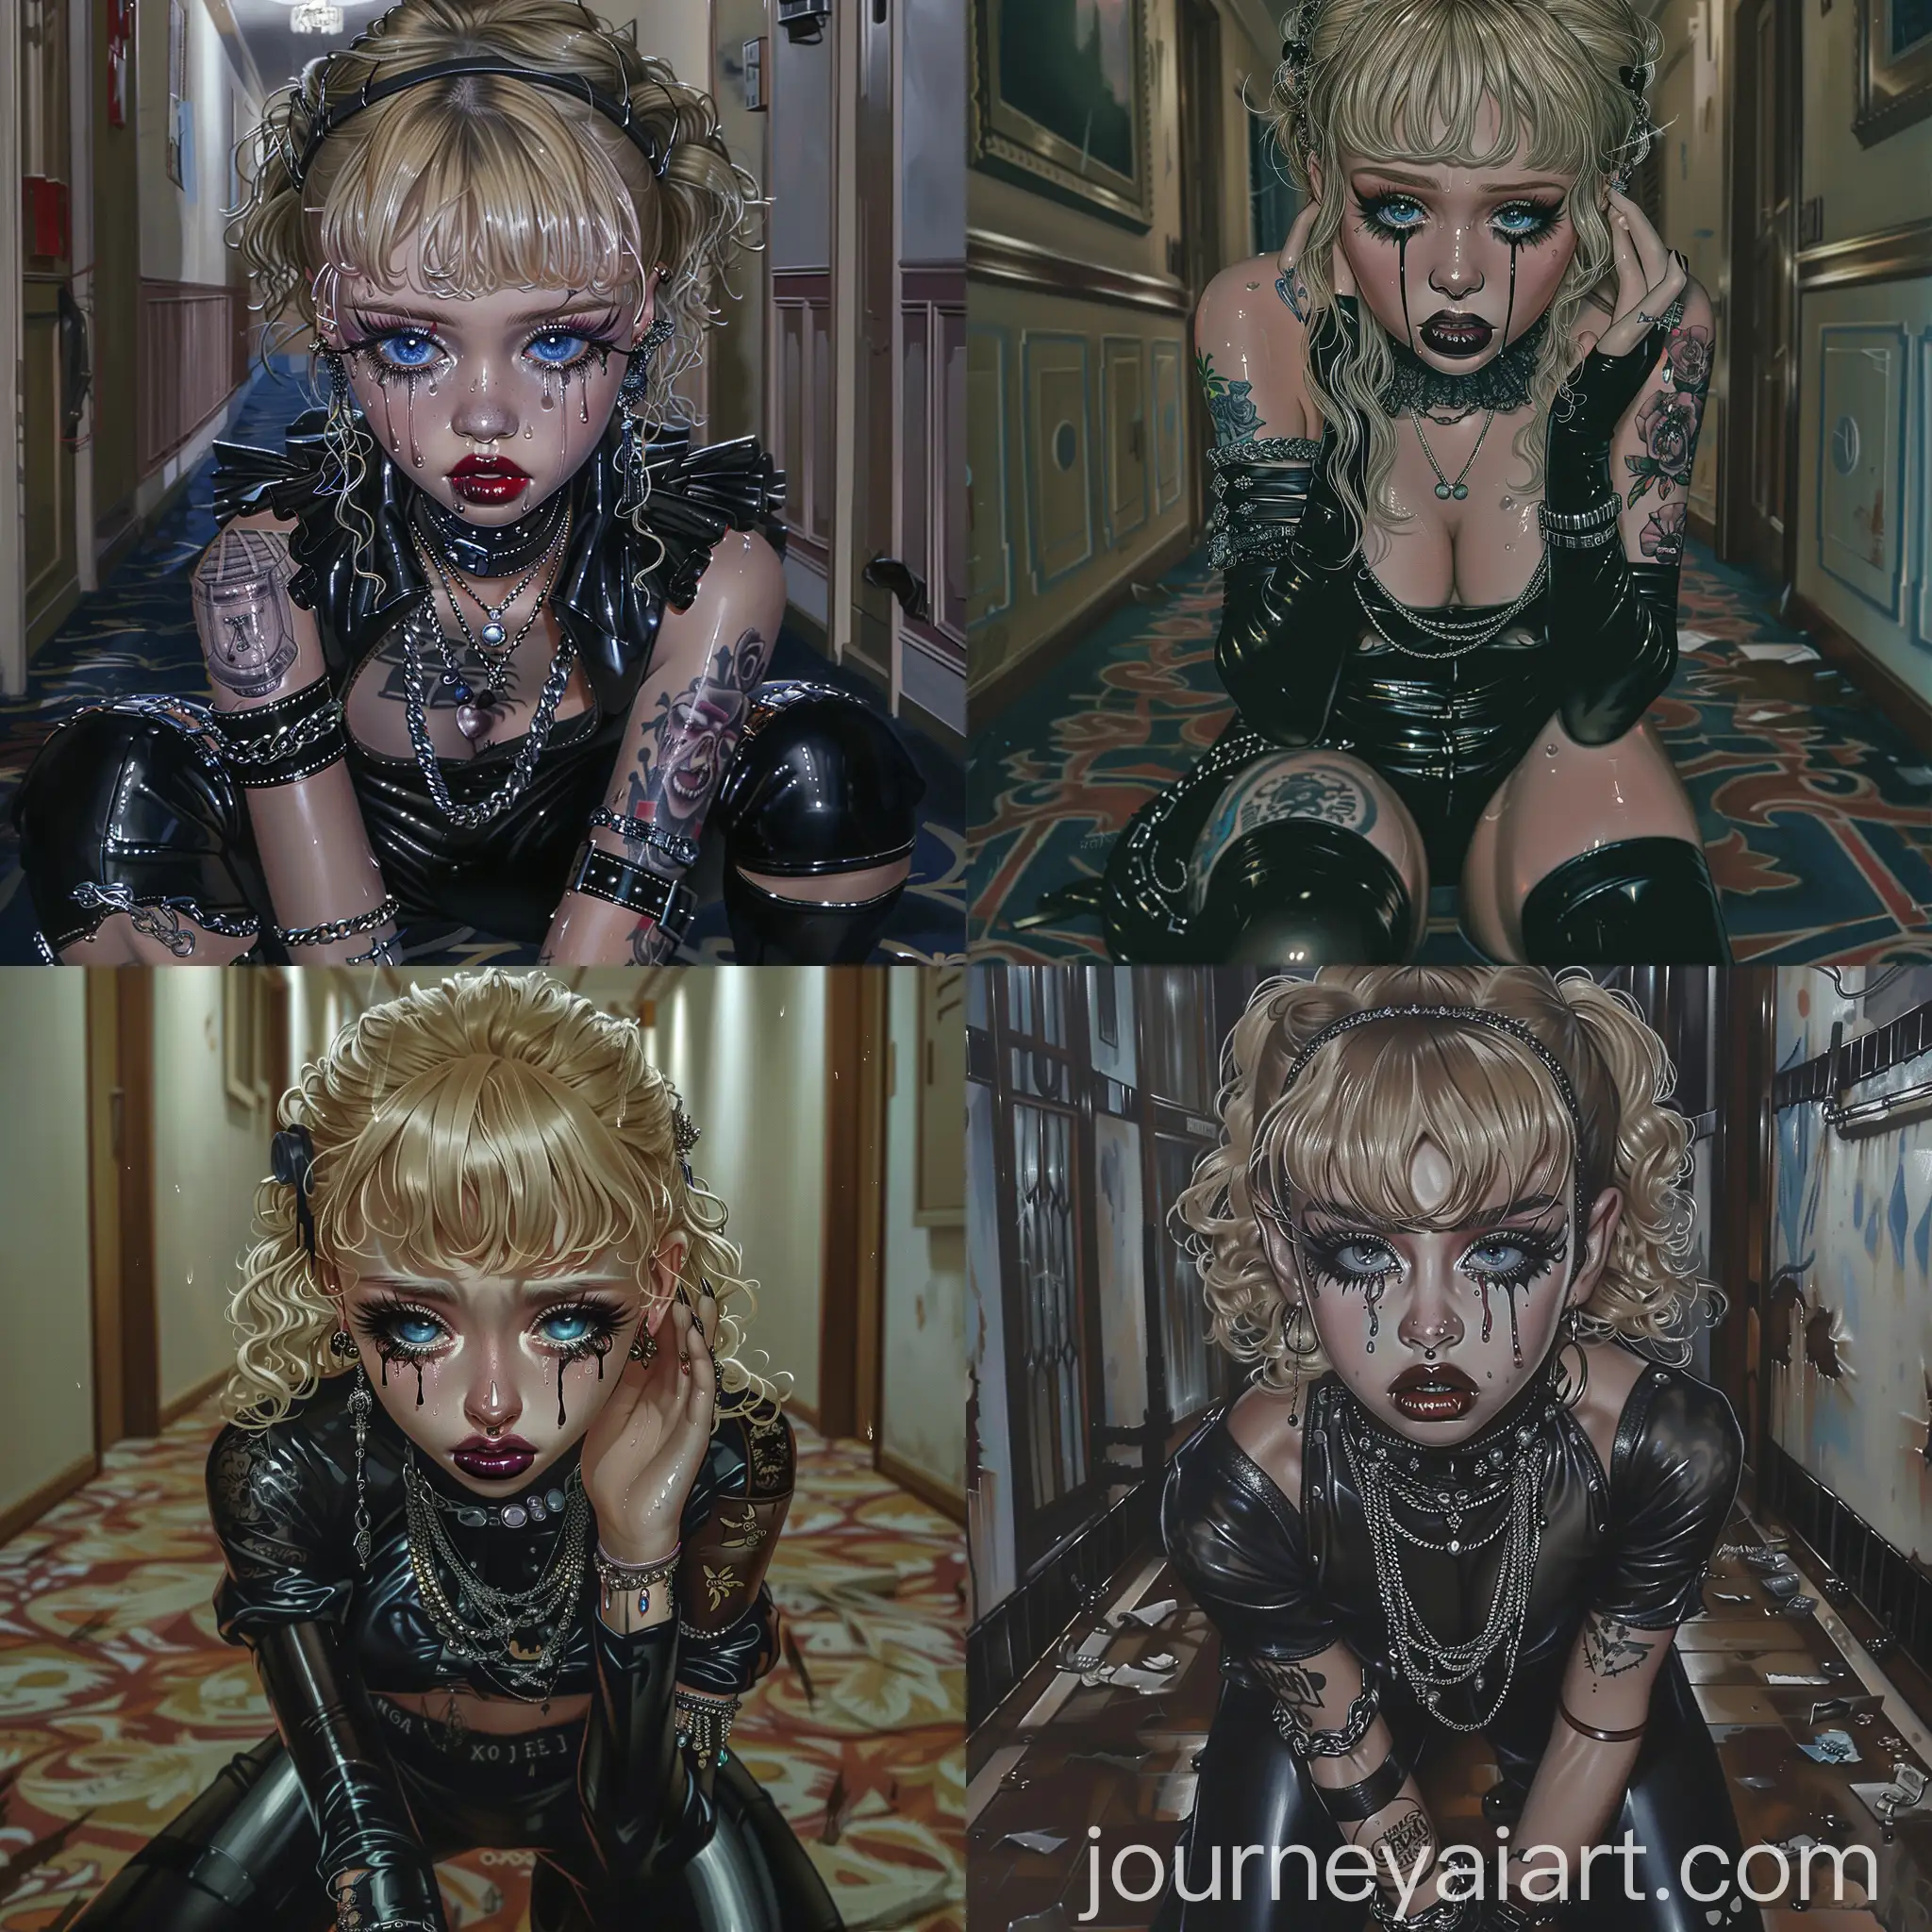 korean art style, 2D, semi realistic, goth girl, blue eyes, glossy skin, plum glossy lips, nicely done black eyeliner, well made black heavy make up, full long black lashes, 20 years old, blonde hair, curls, one side of hair behind ear, bangs, goth style, goth girl, shedding tears, sad expression, goth latex choker, different silver necklaces, well made japanese tattoos on neck and arms, well made goth blouse with designs and style, black latex pants, goth belt, different leather bracelets and silver bracelets, black glossy nail polish, kneeled down, in well made hotel corridor, haunted, abandoned, grotesque, spooky vibe